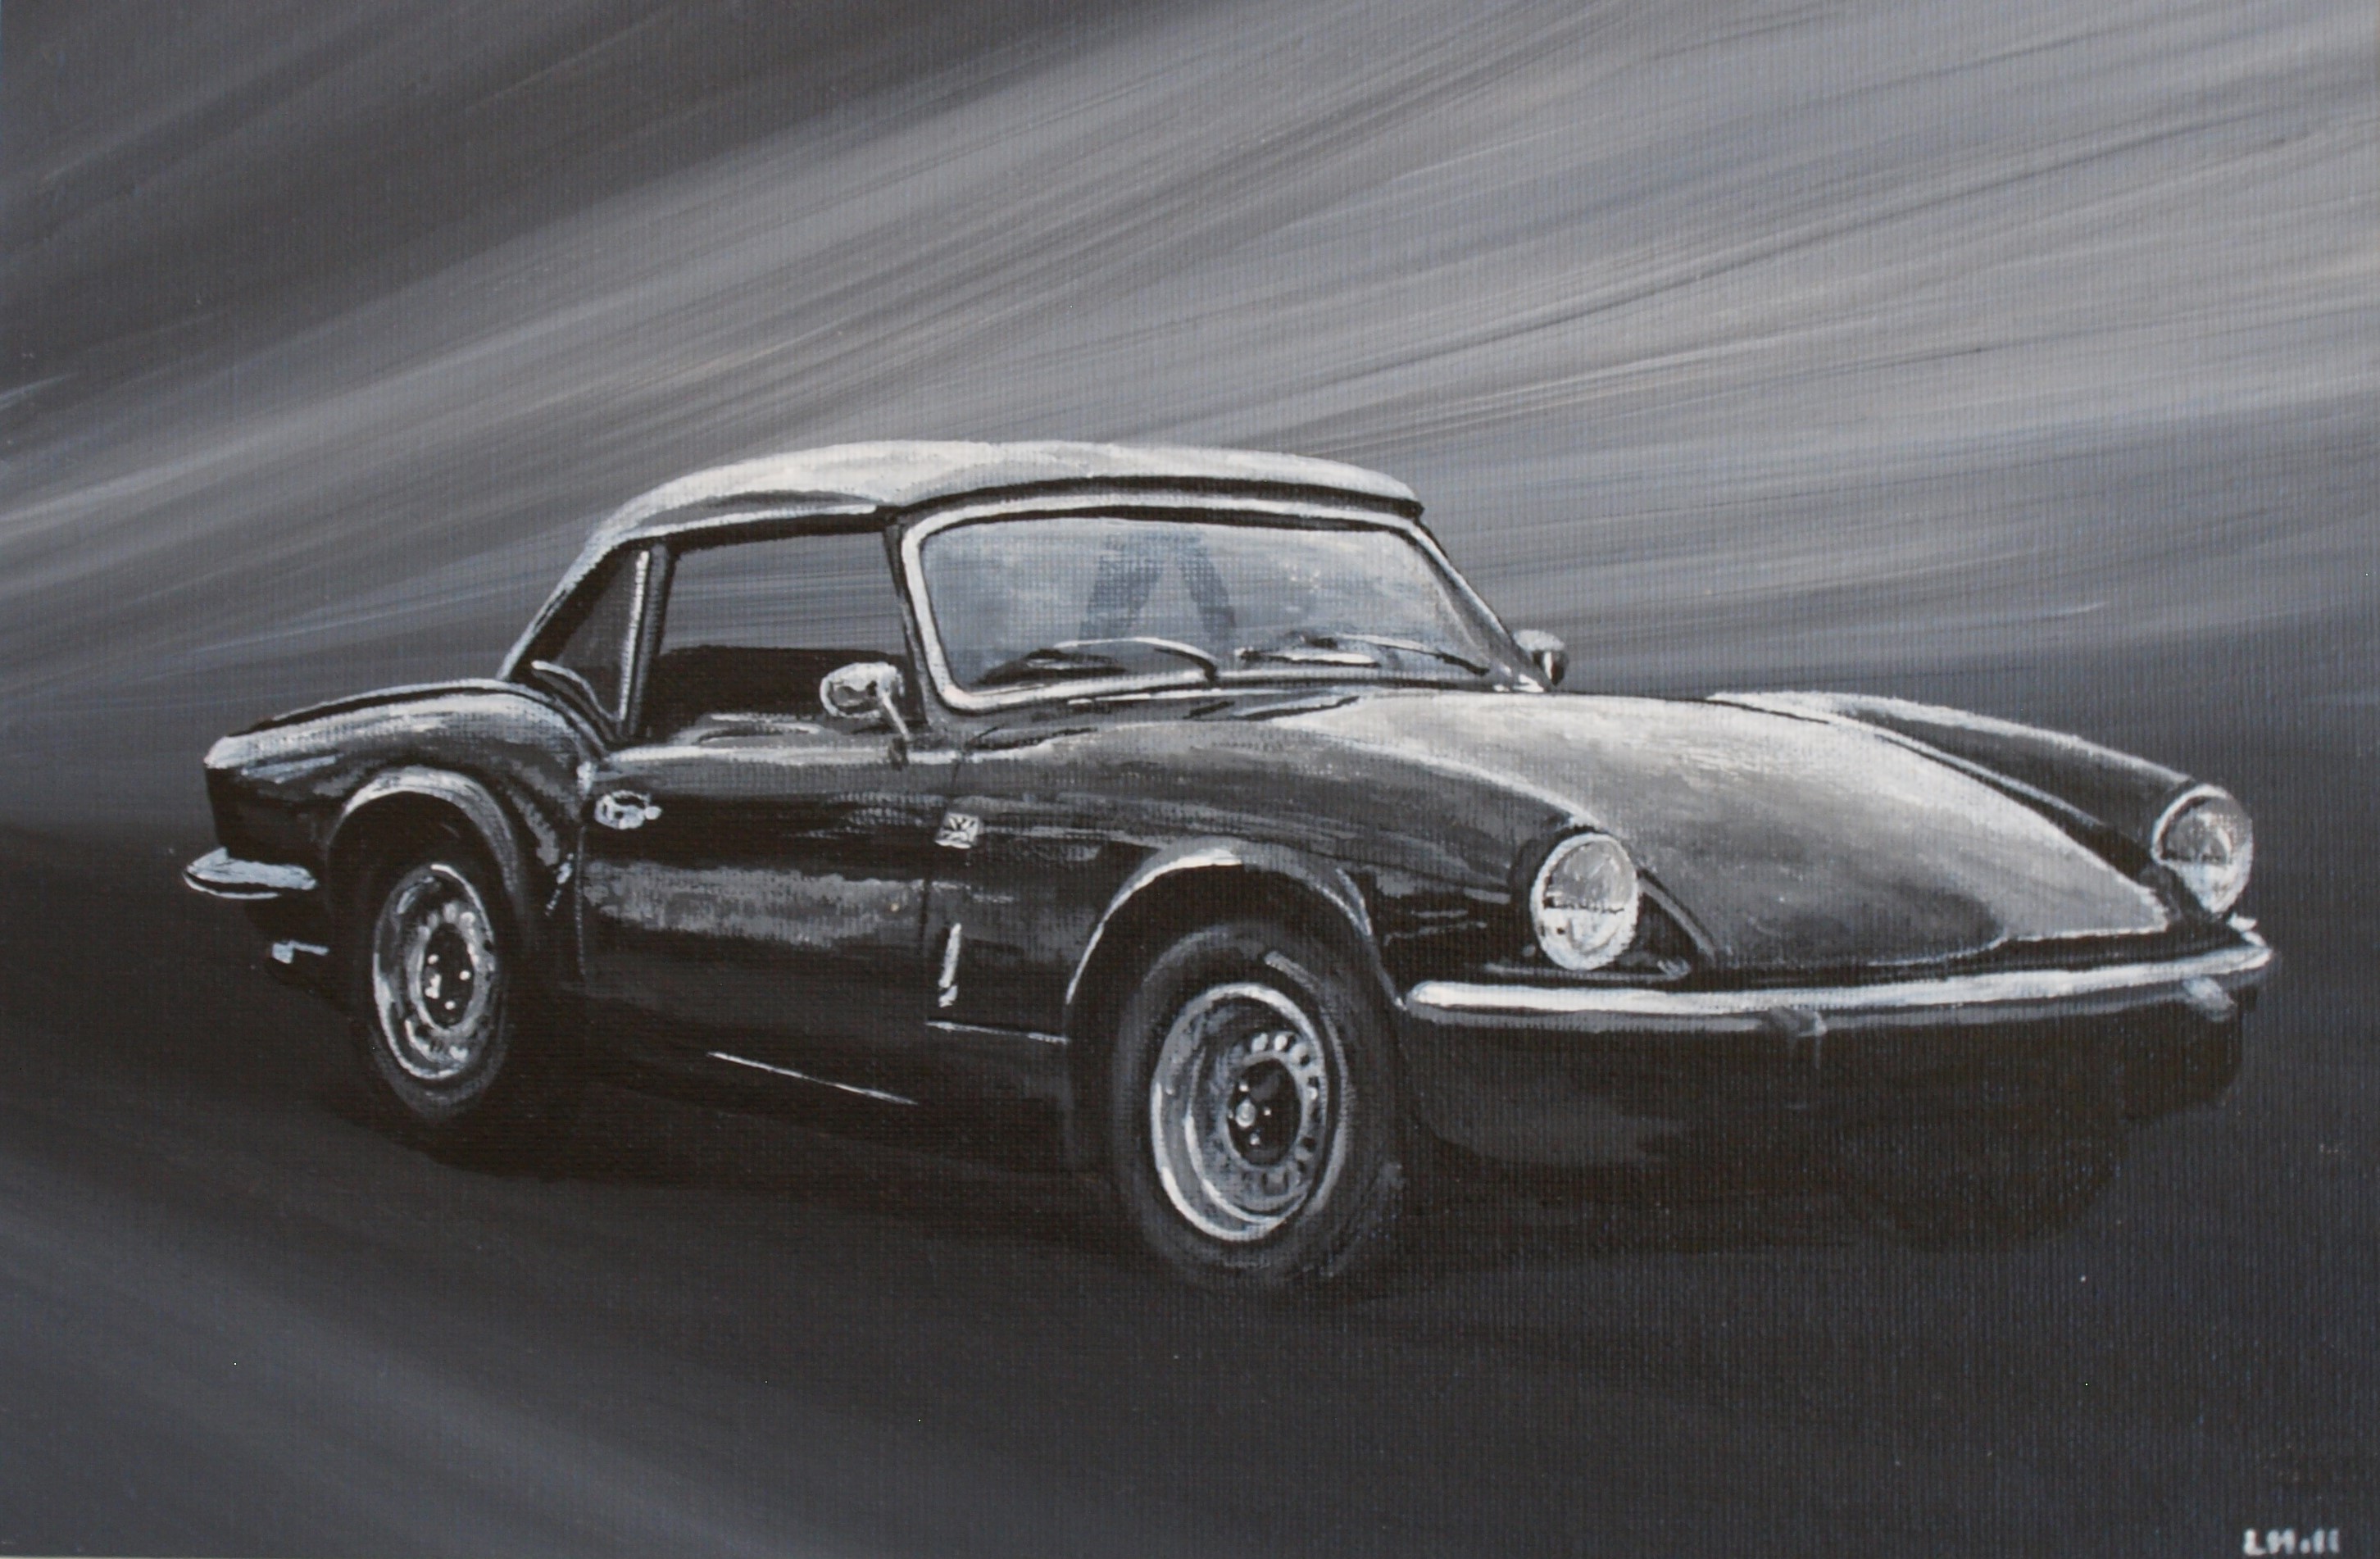 Triumph Spitfire acrylic painting by Louisa Hill